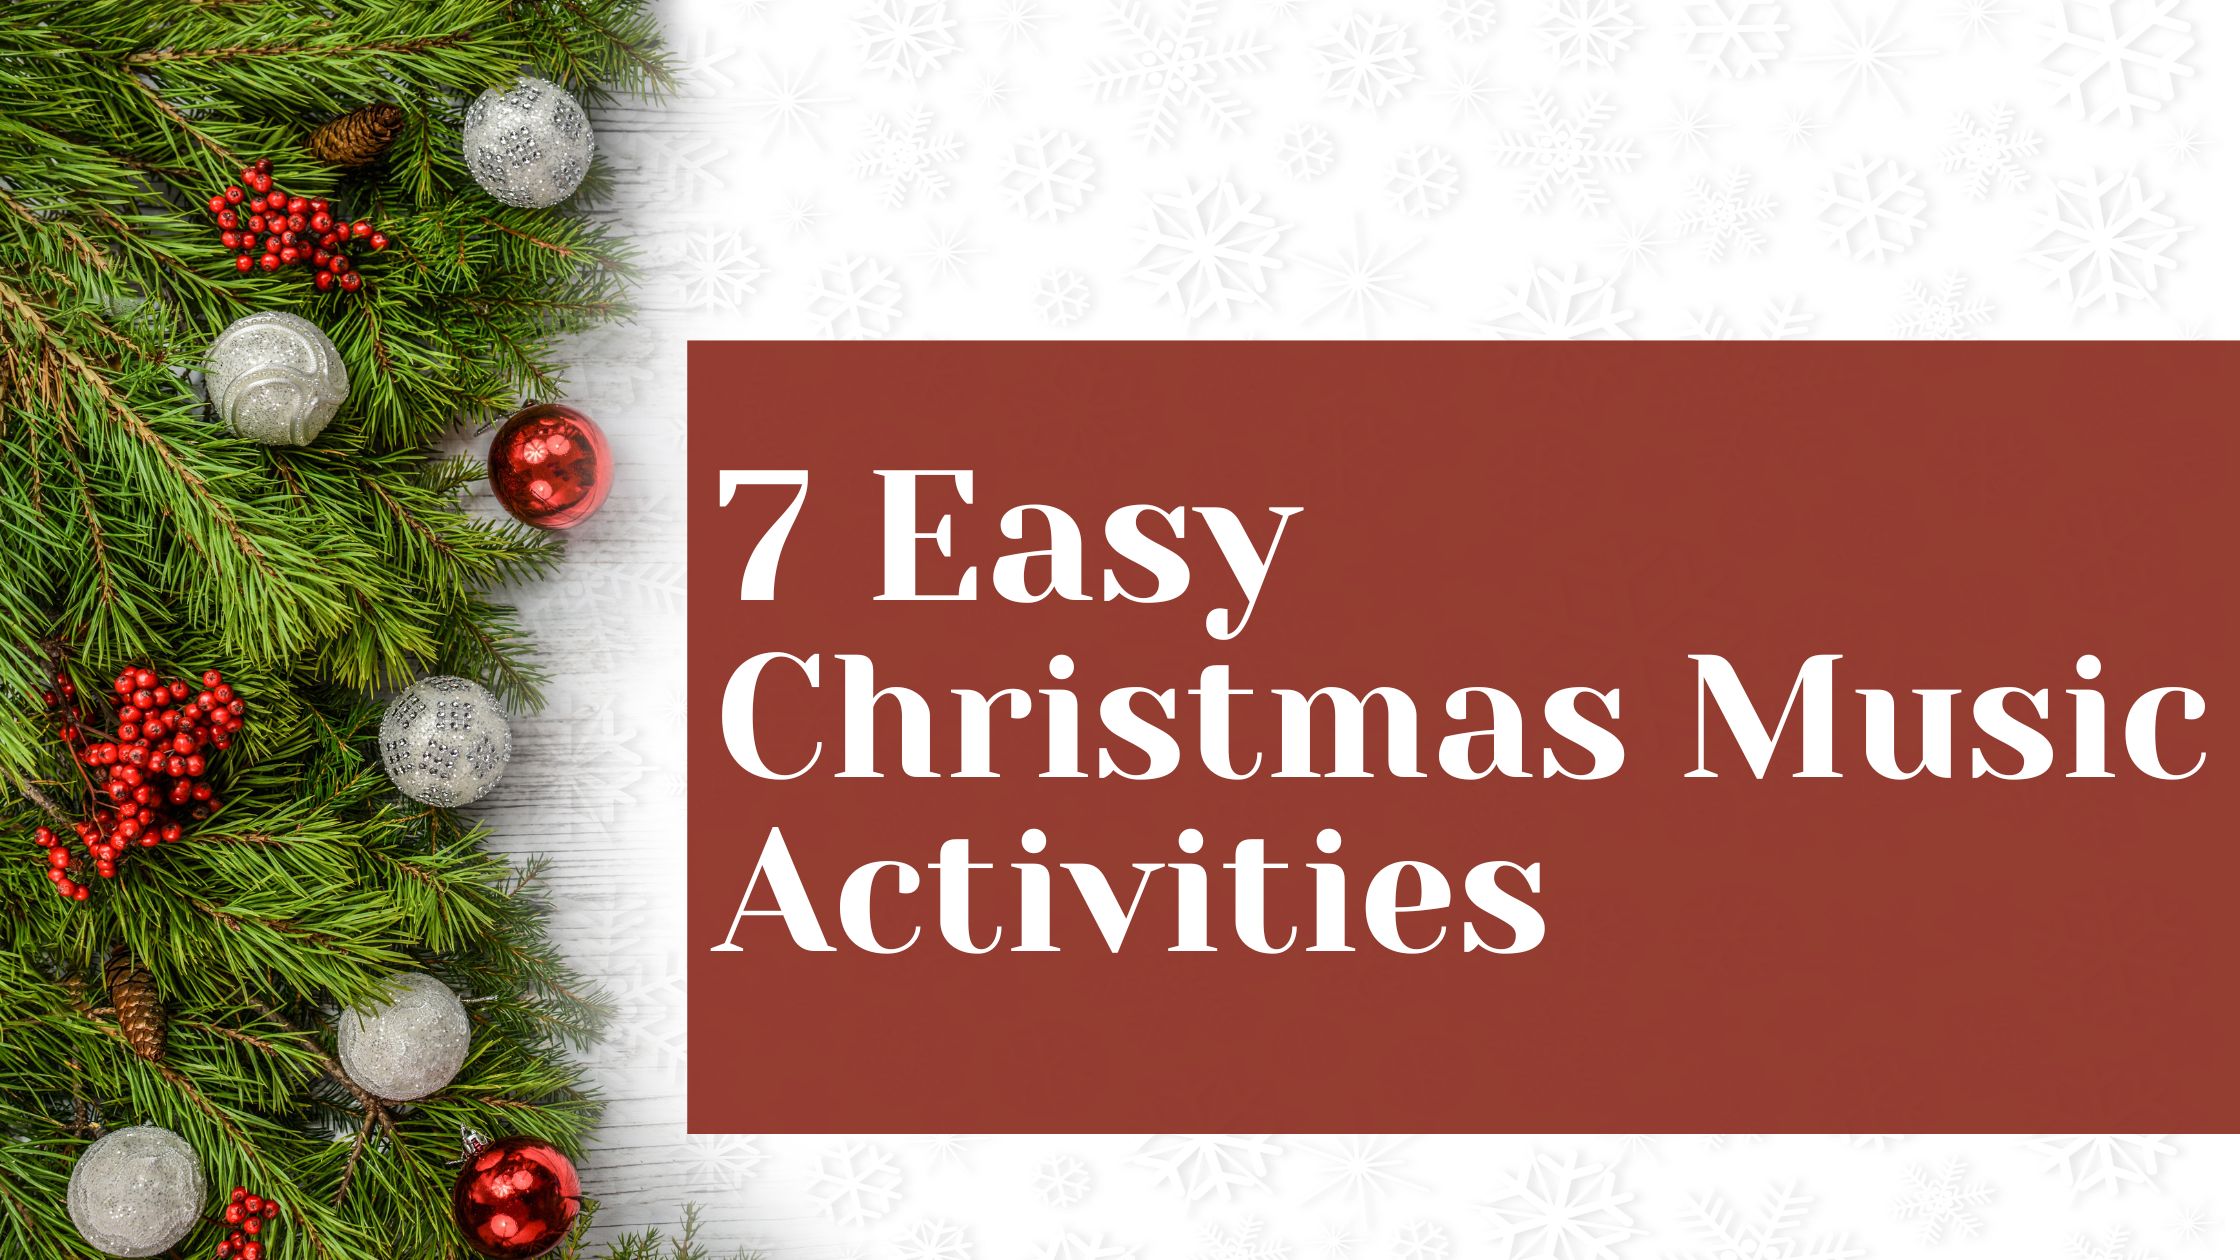 7 Easy Christmas Music Class Activities (text with Christmas greenery background)